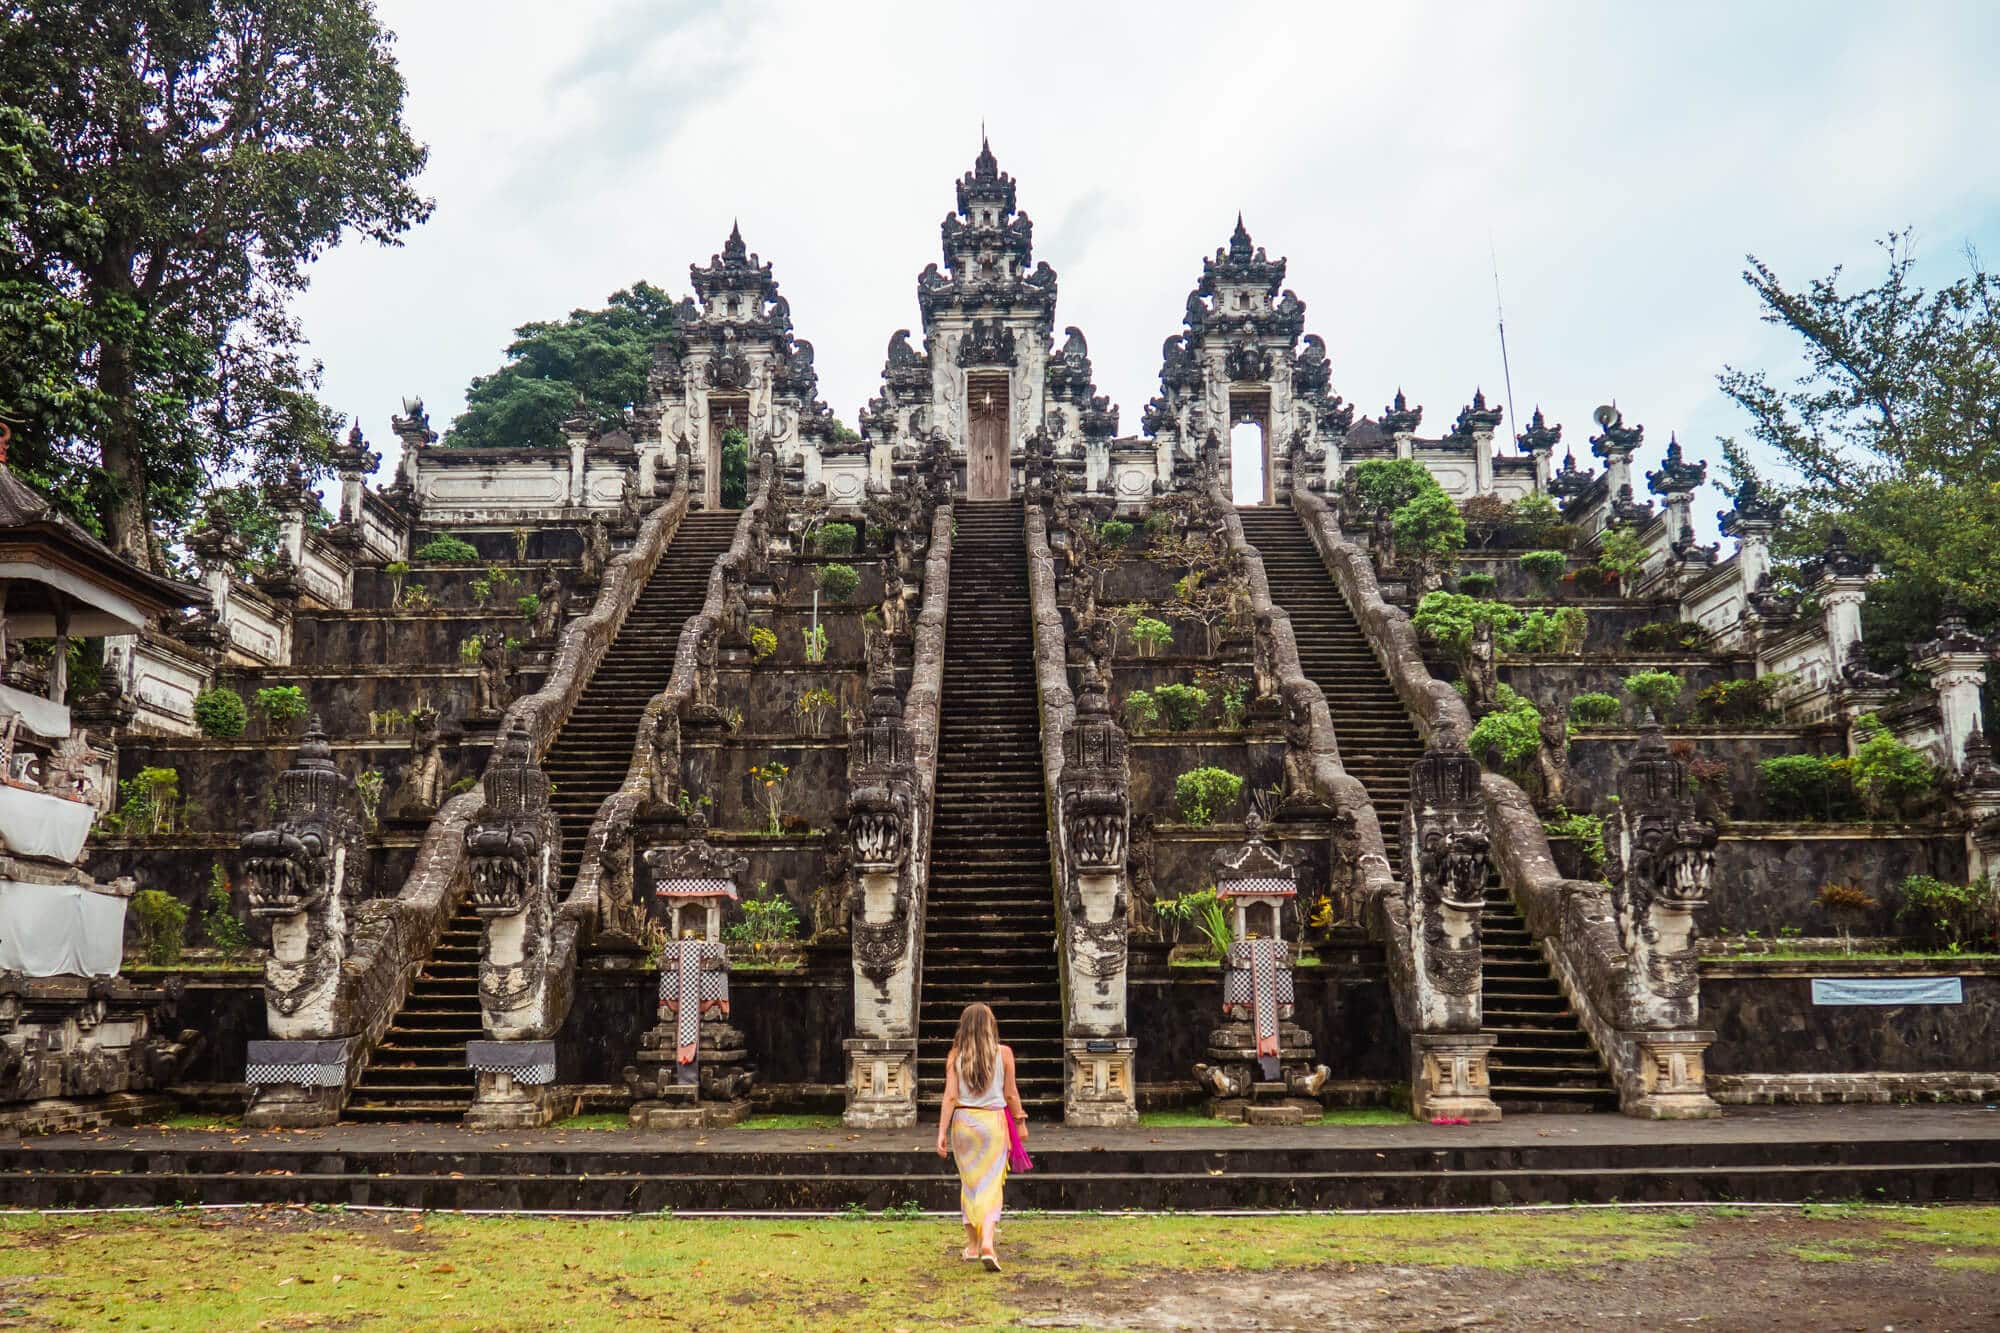 Everything you need to know before visiting Pura Lempuyang Temple in Bali: What to wear, how to get there, what to expect + why I think you should add Bali's most spectacular temple to your bucket list now